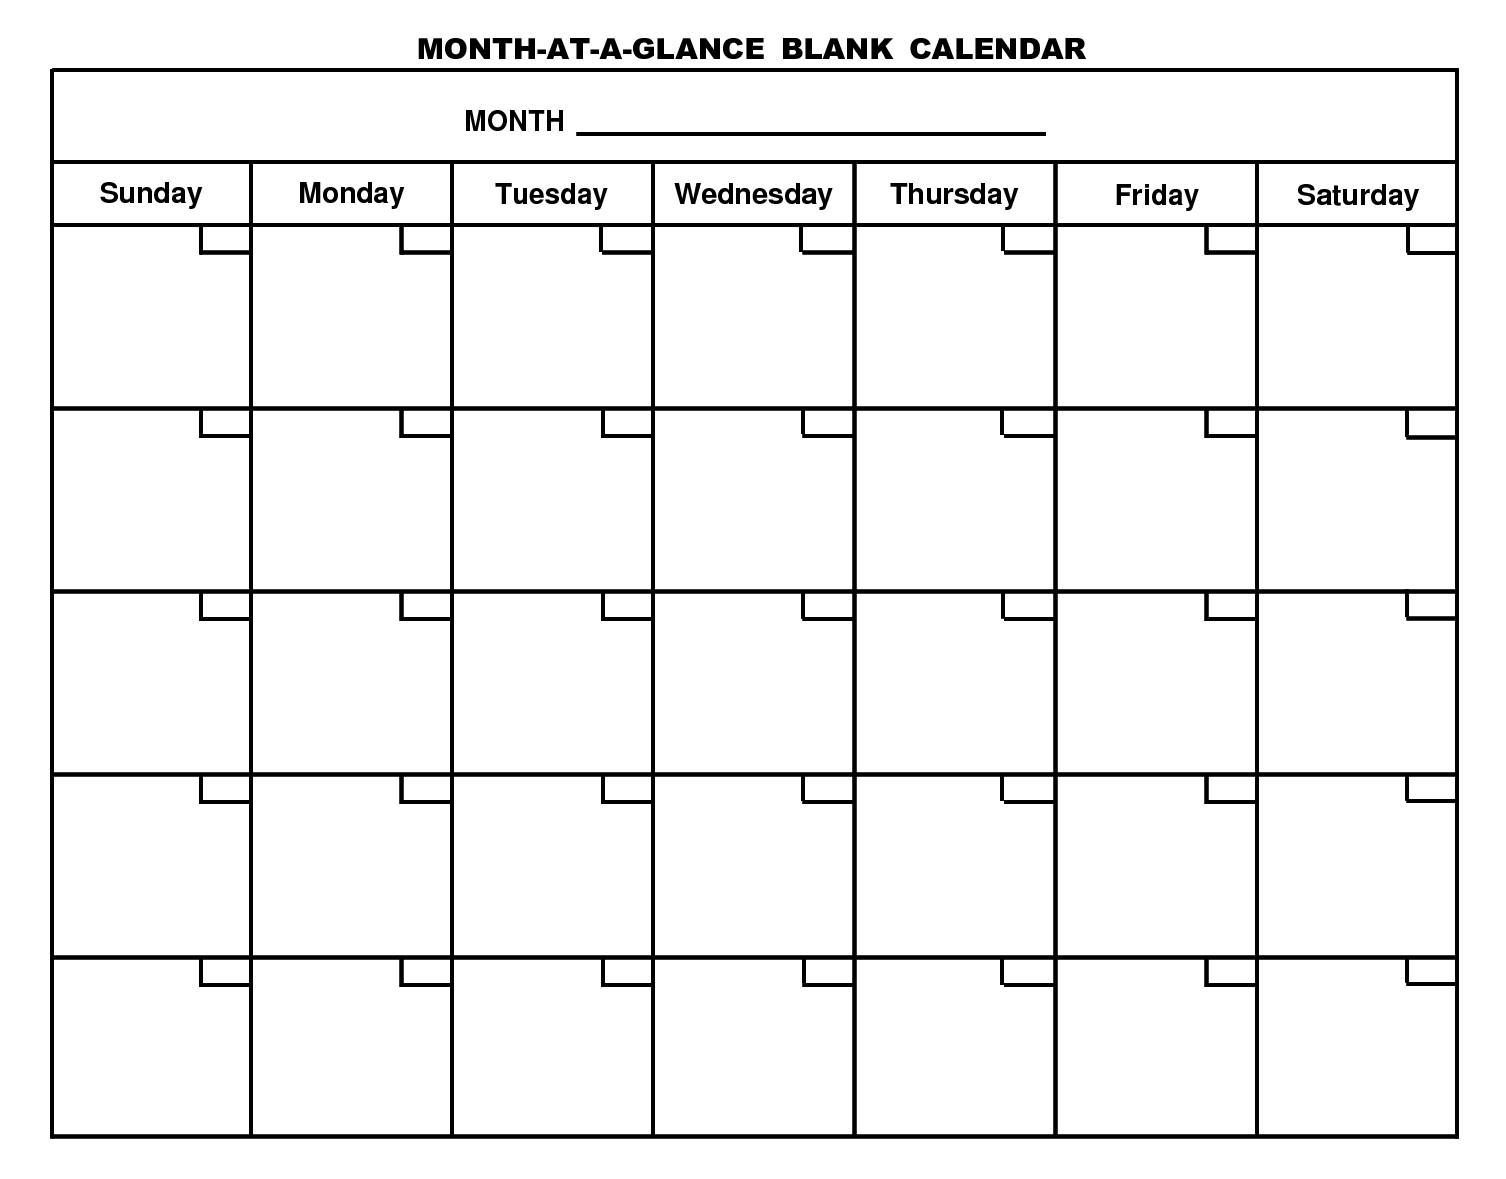 blank monthly calendars yahoo search results | printable